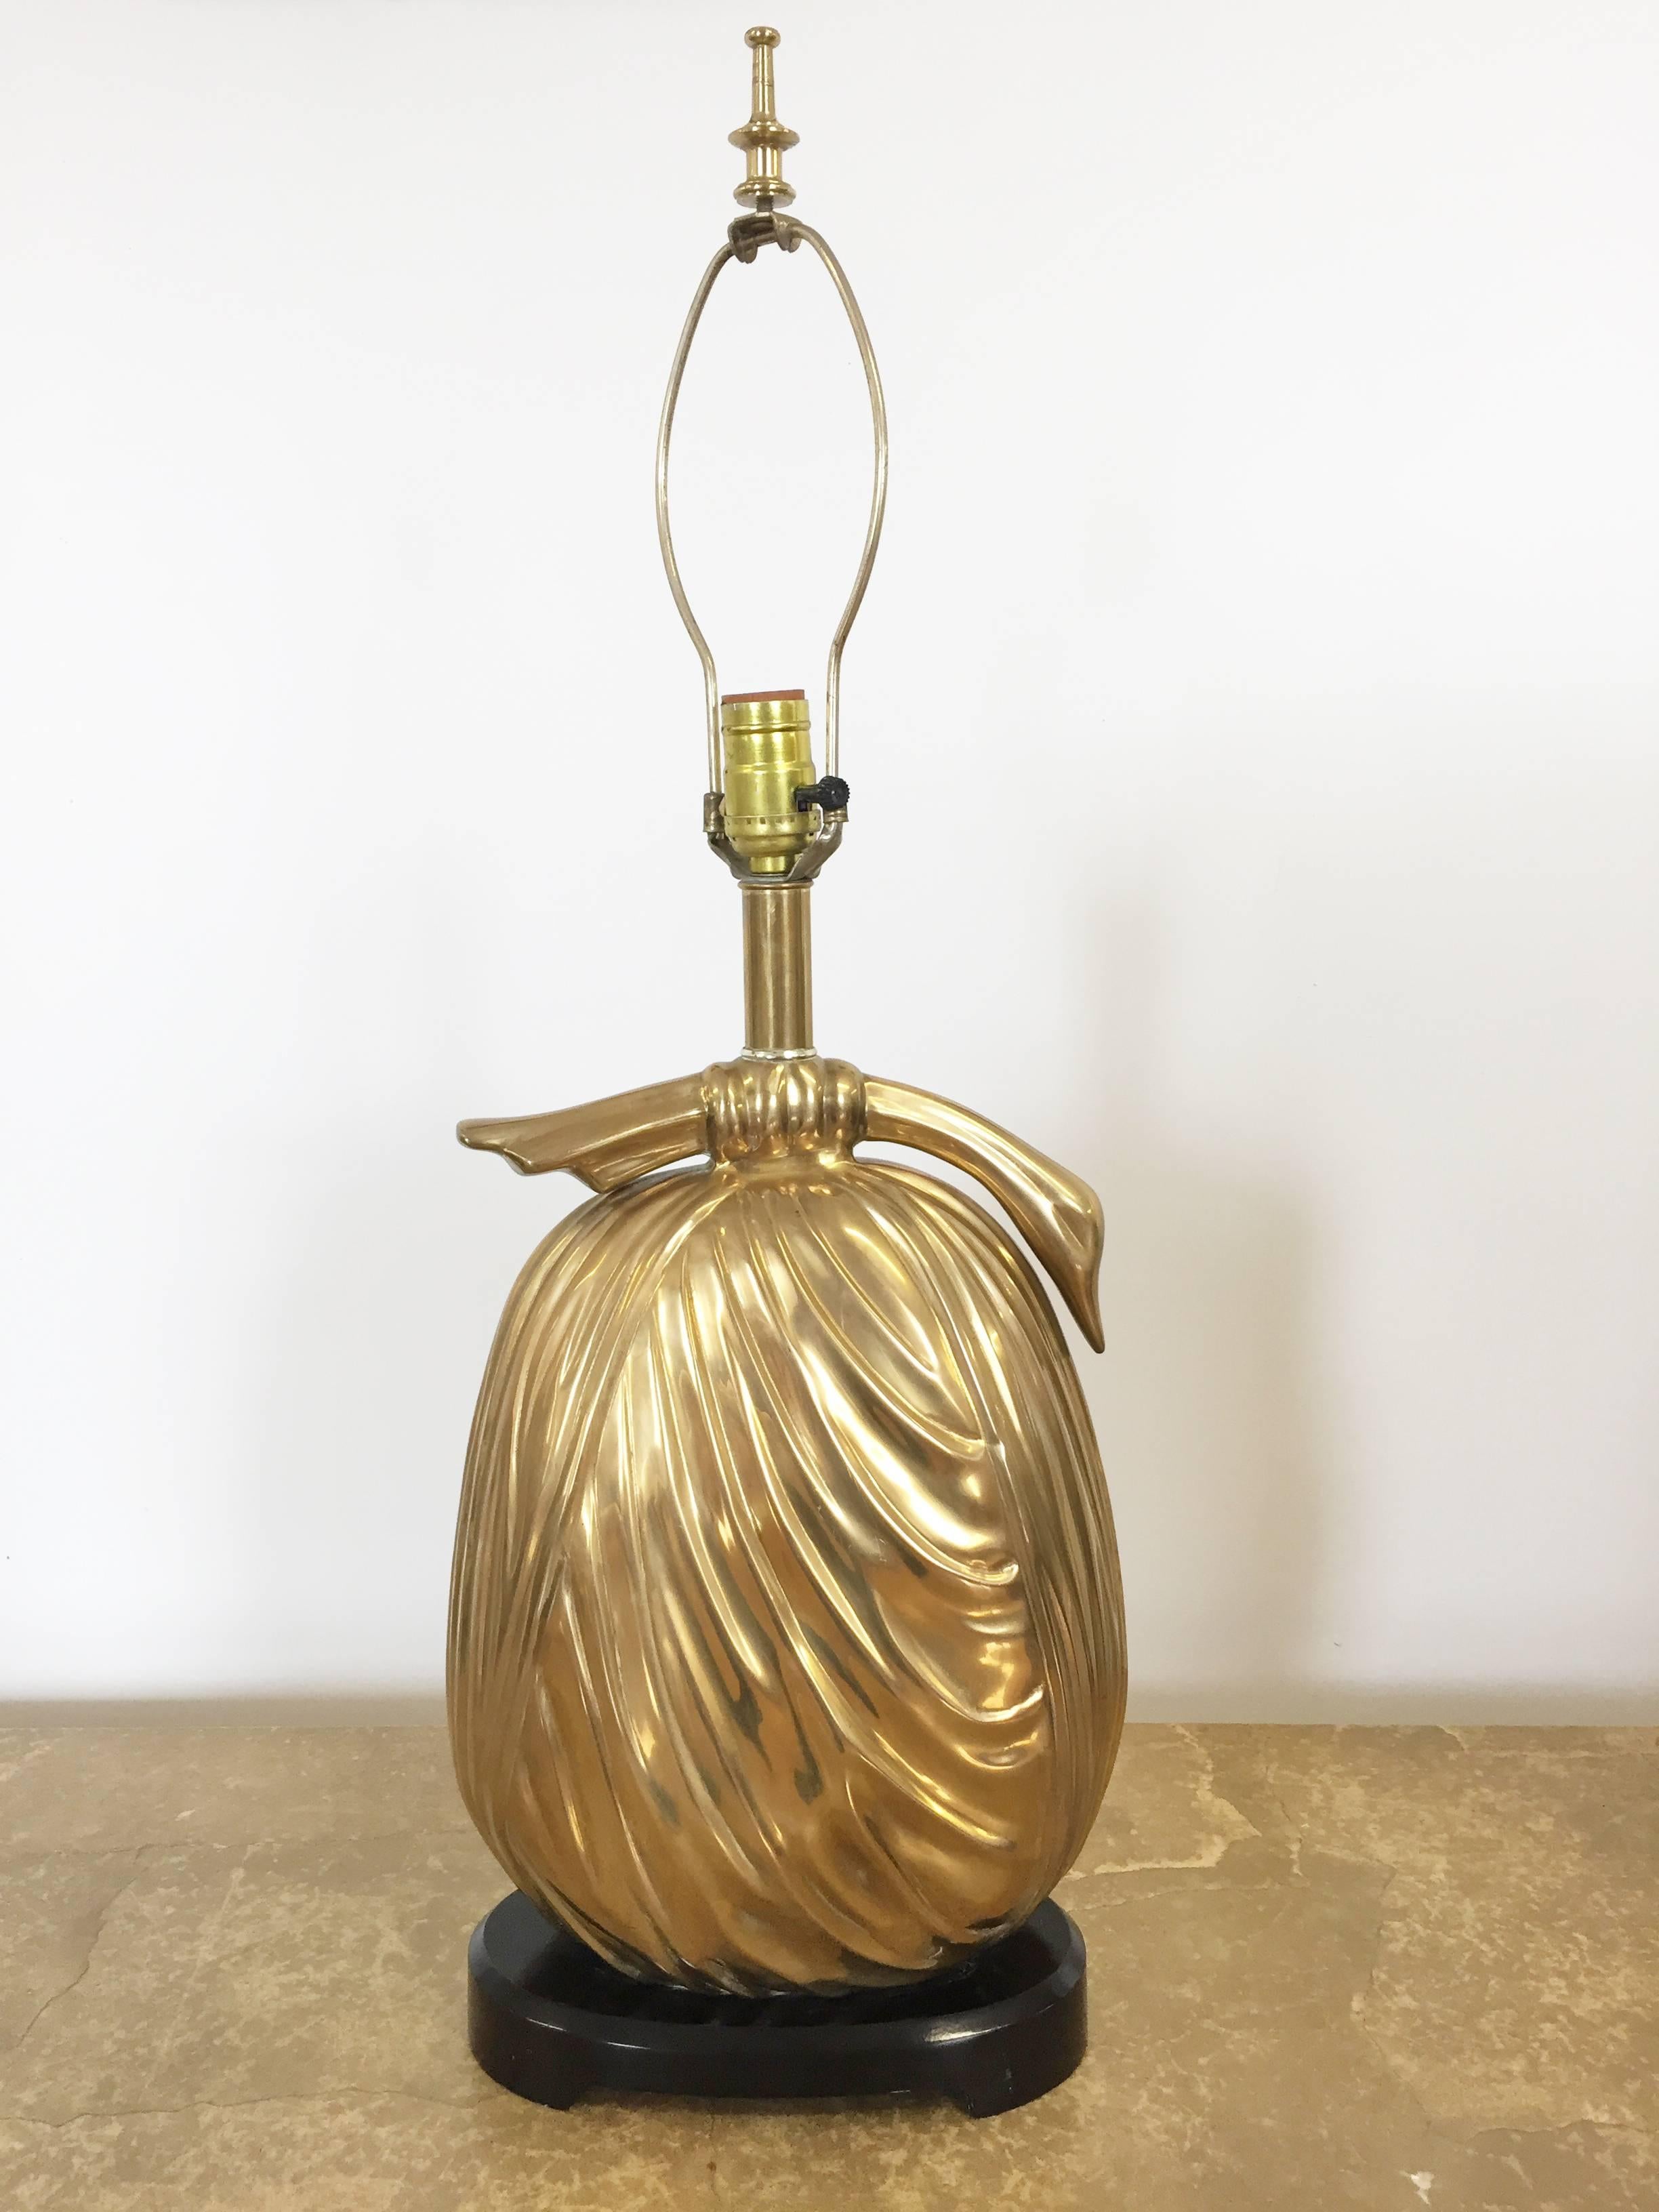 Asian style Midcentury table lamp by Chapman. Weighty brass bundle form sits atop dark wood Asian-style base. Brass with great patina. Unusual form that produces a lovely warm light. 18 in. high to top of body of lamp; 29 1/2 in. high to top of